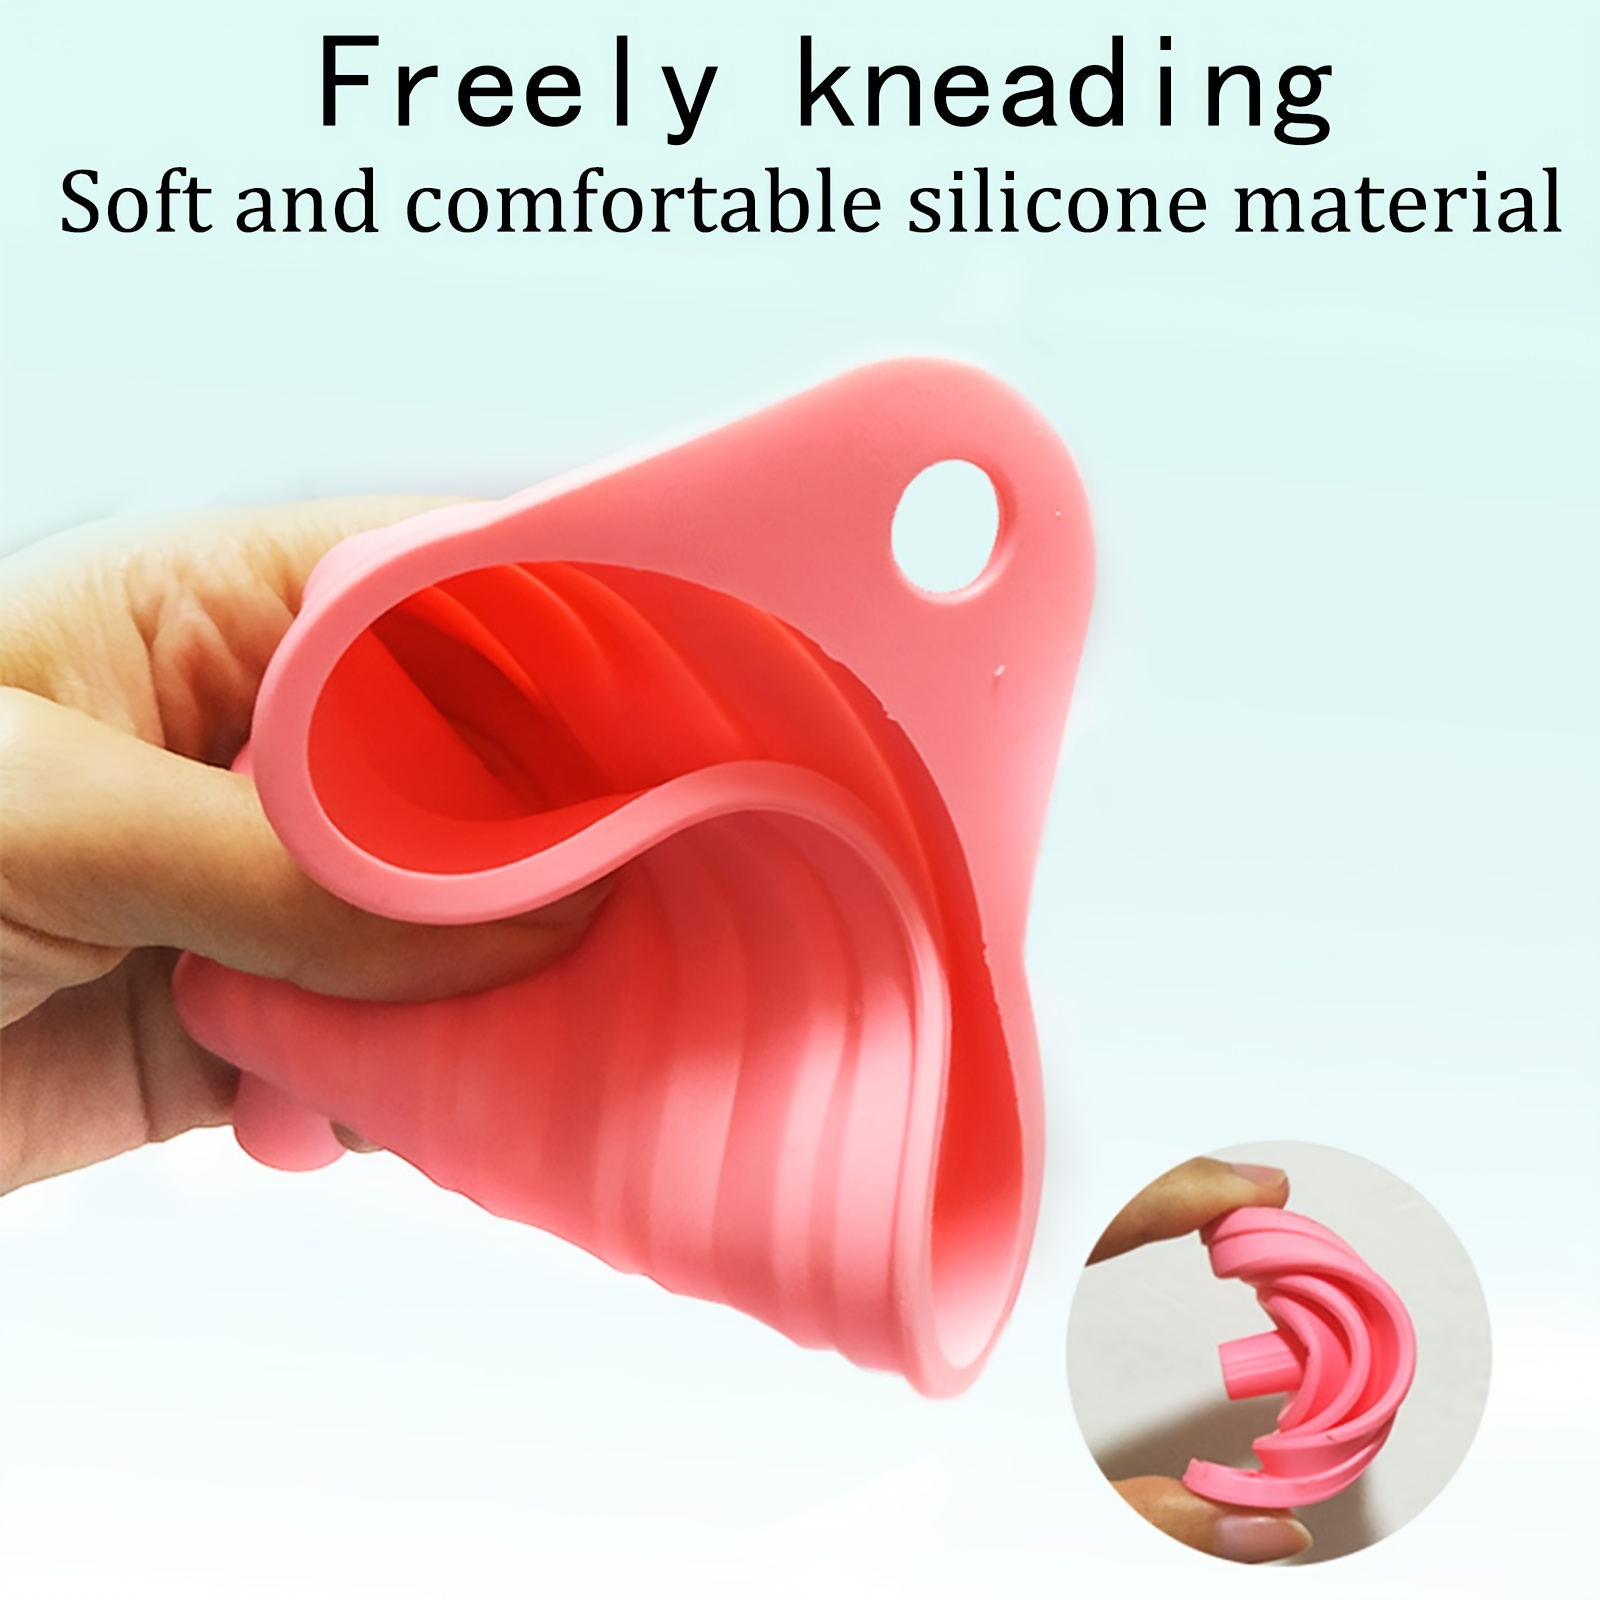 Mini Foldable Silicone Funnel Diamond Painting Accessories Tool